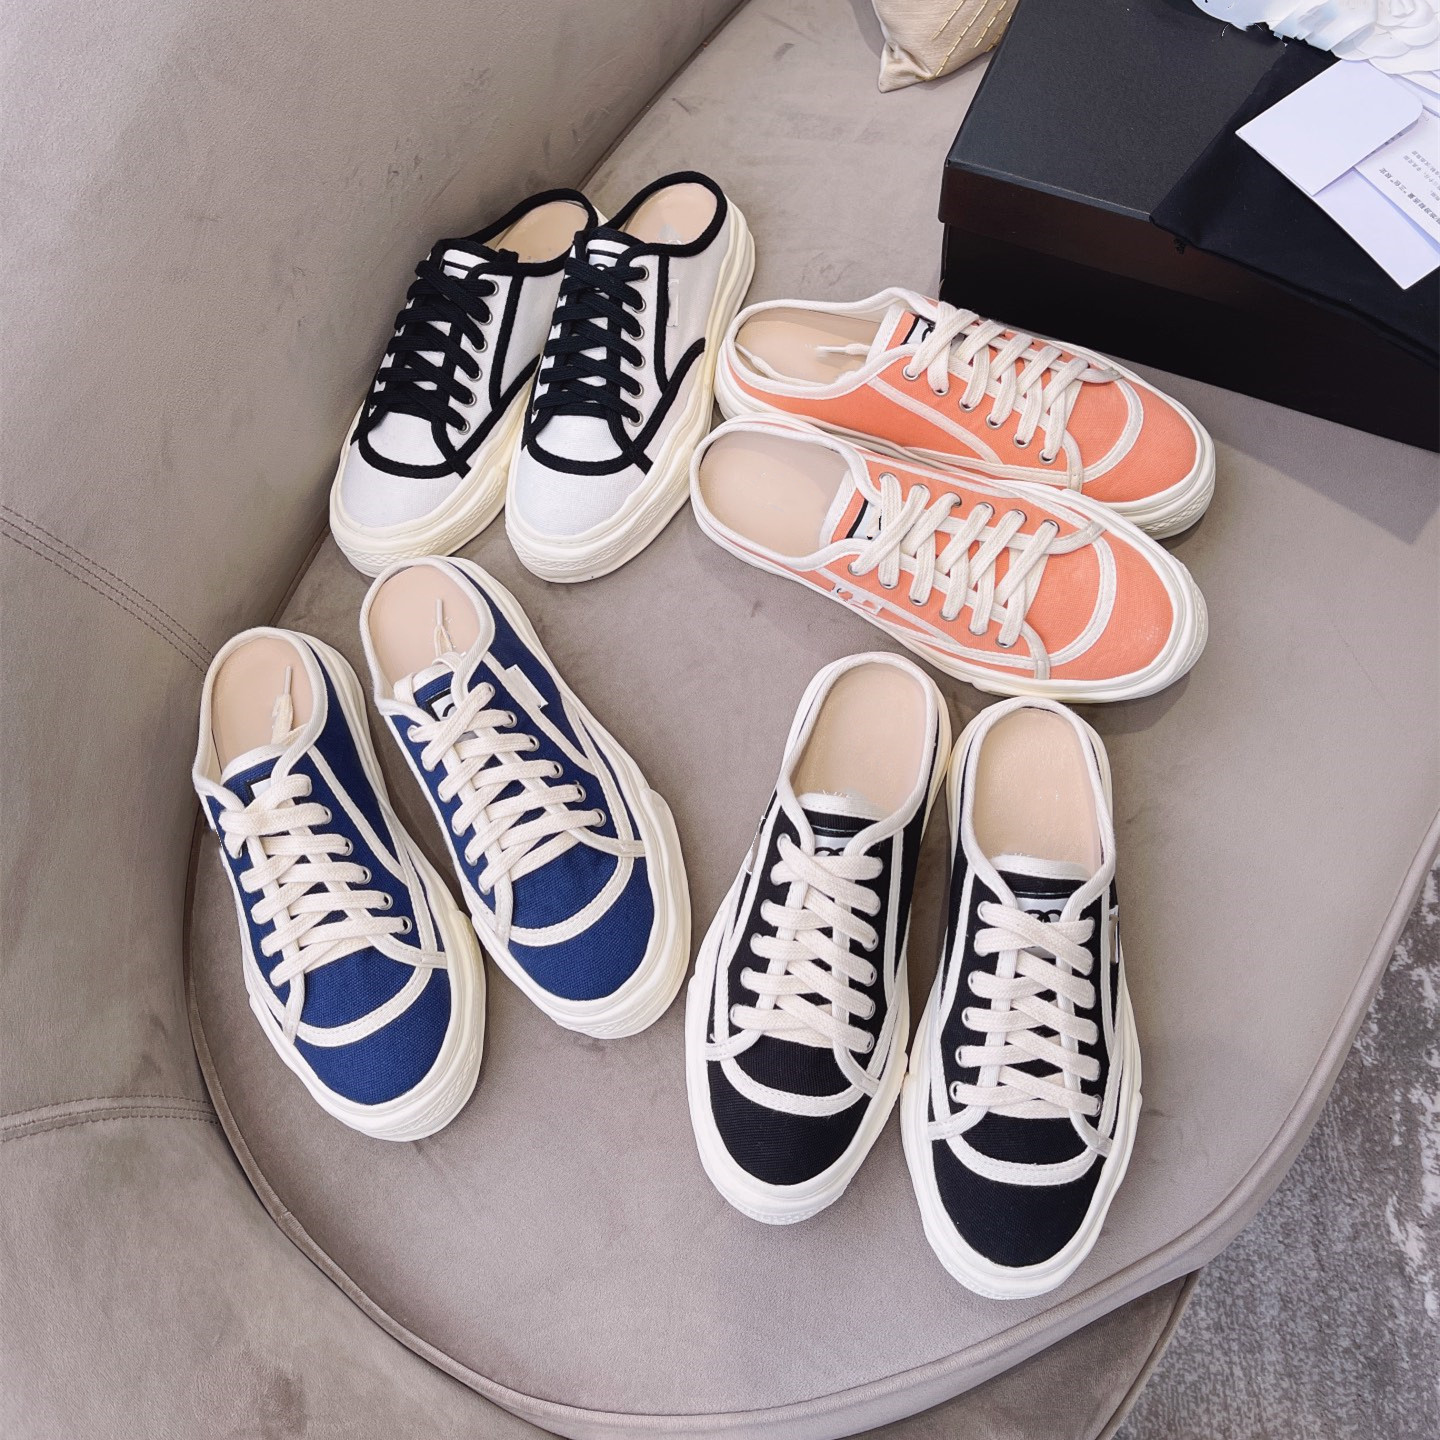 

2021 designer women canvas shoes casual shoe flat base rubber comfortable breathable macaron color black white rainbow young dynamic energetic size35-40